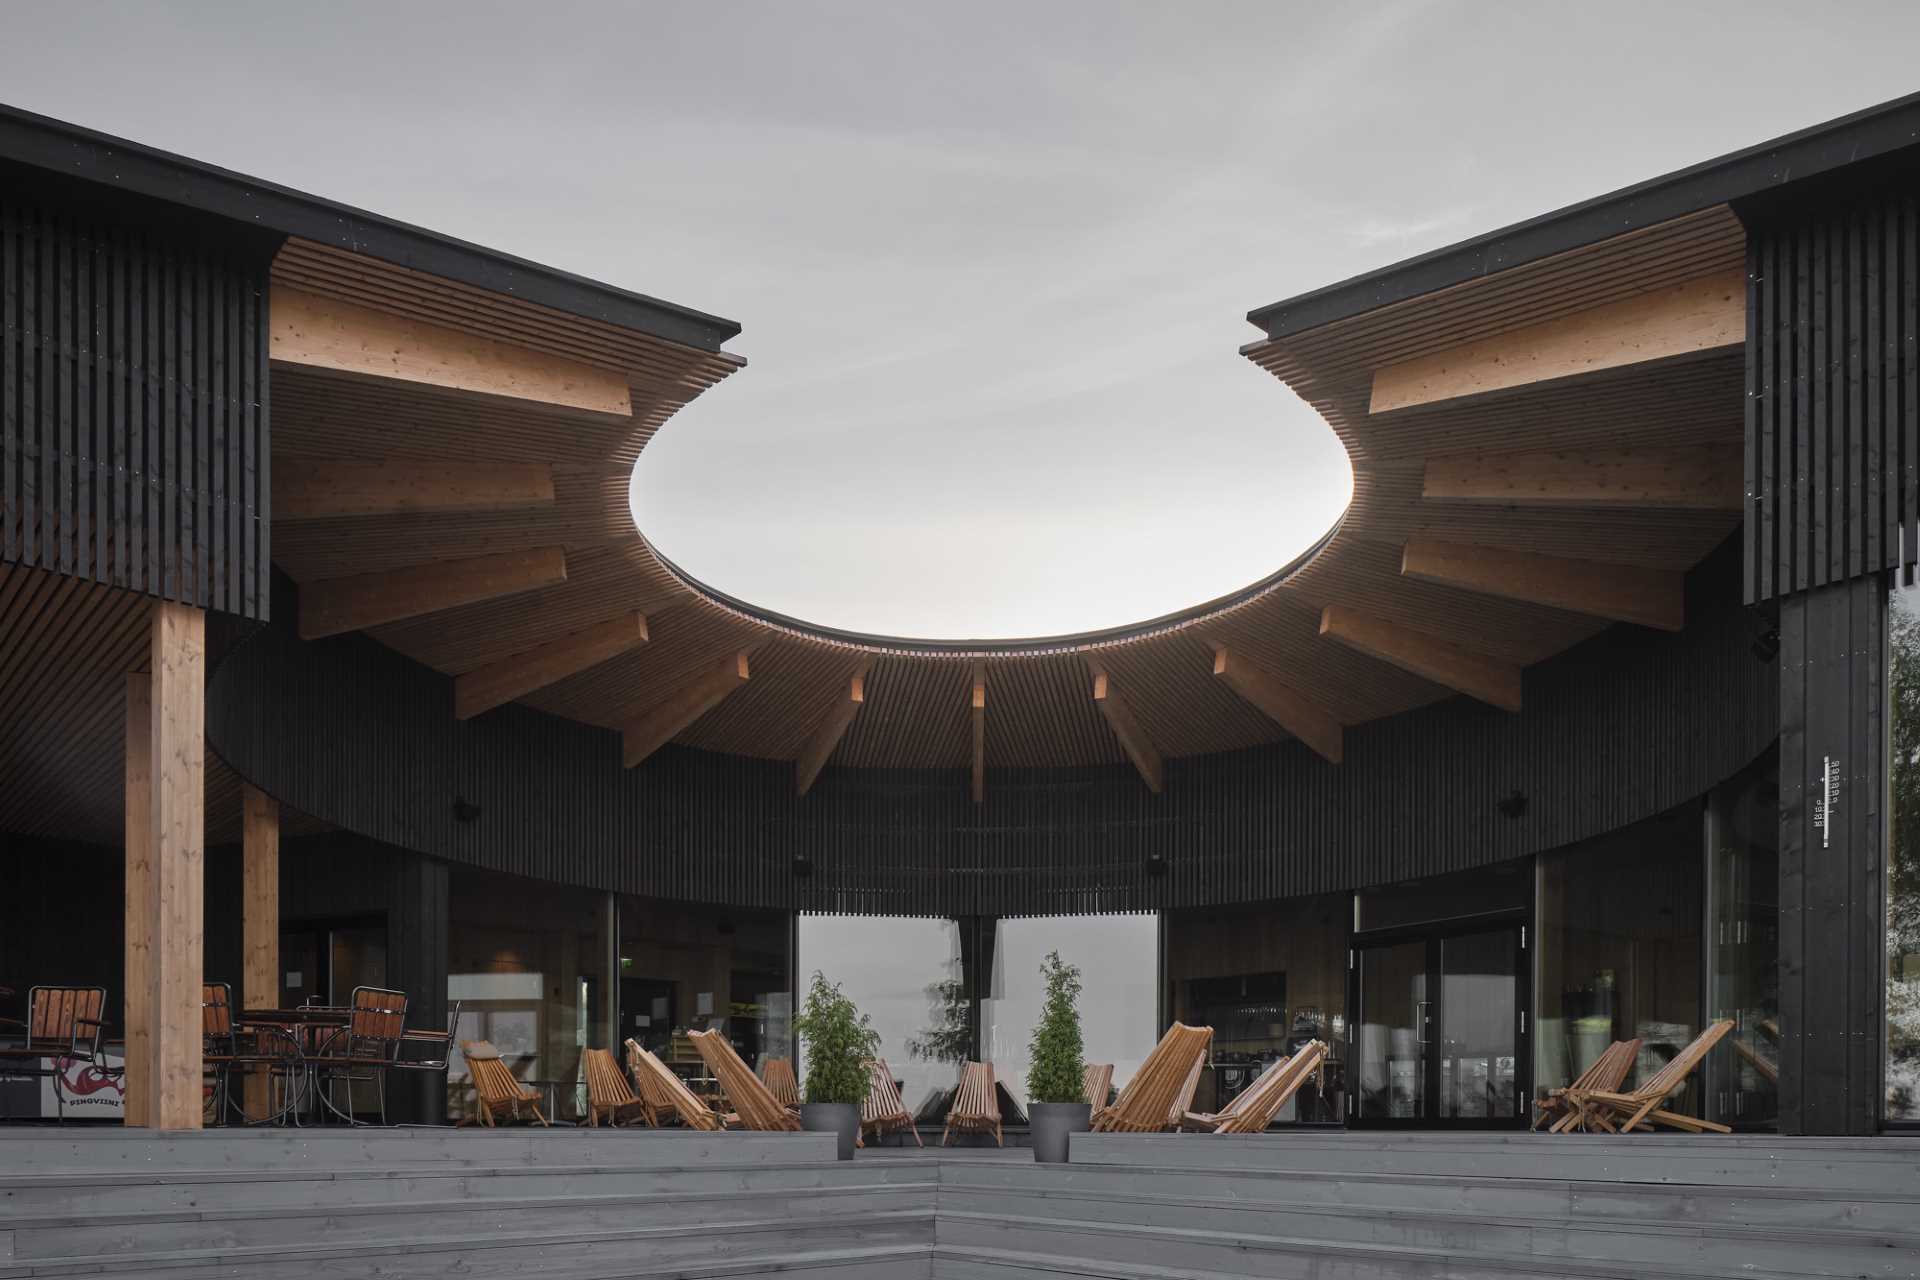 This new lakeside sauna and restaurant boast a strong design aesthetic based on a central, curved outdoor space with the restaurant and sauna spaces spiraling around it.